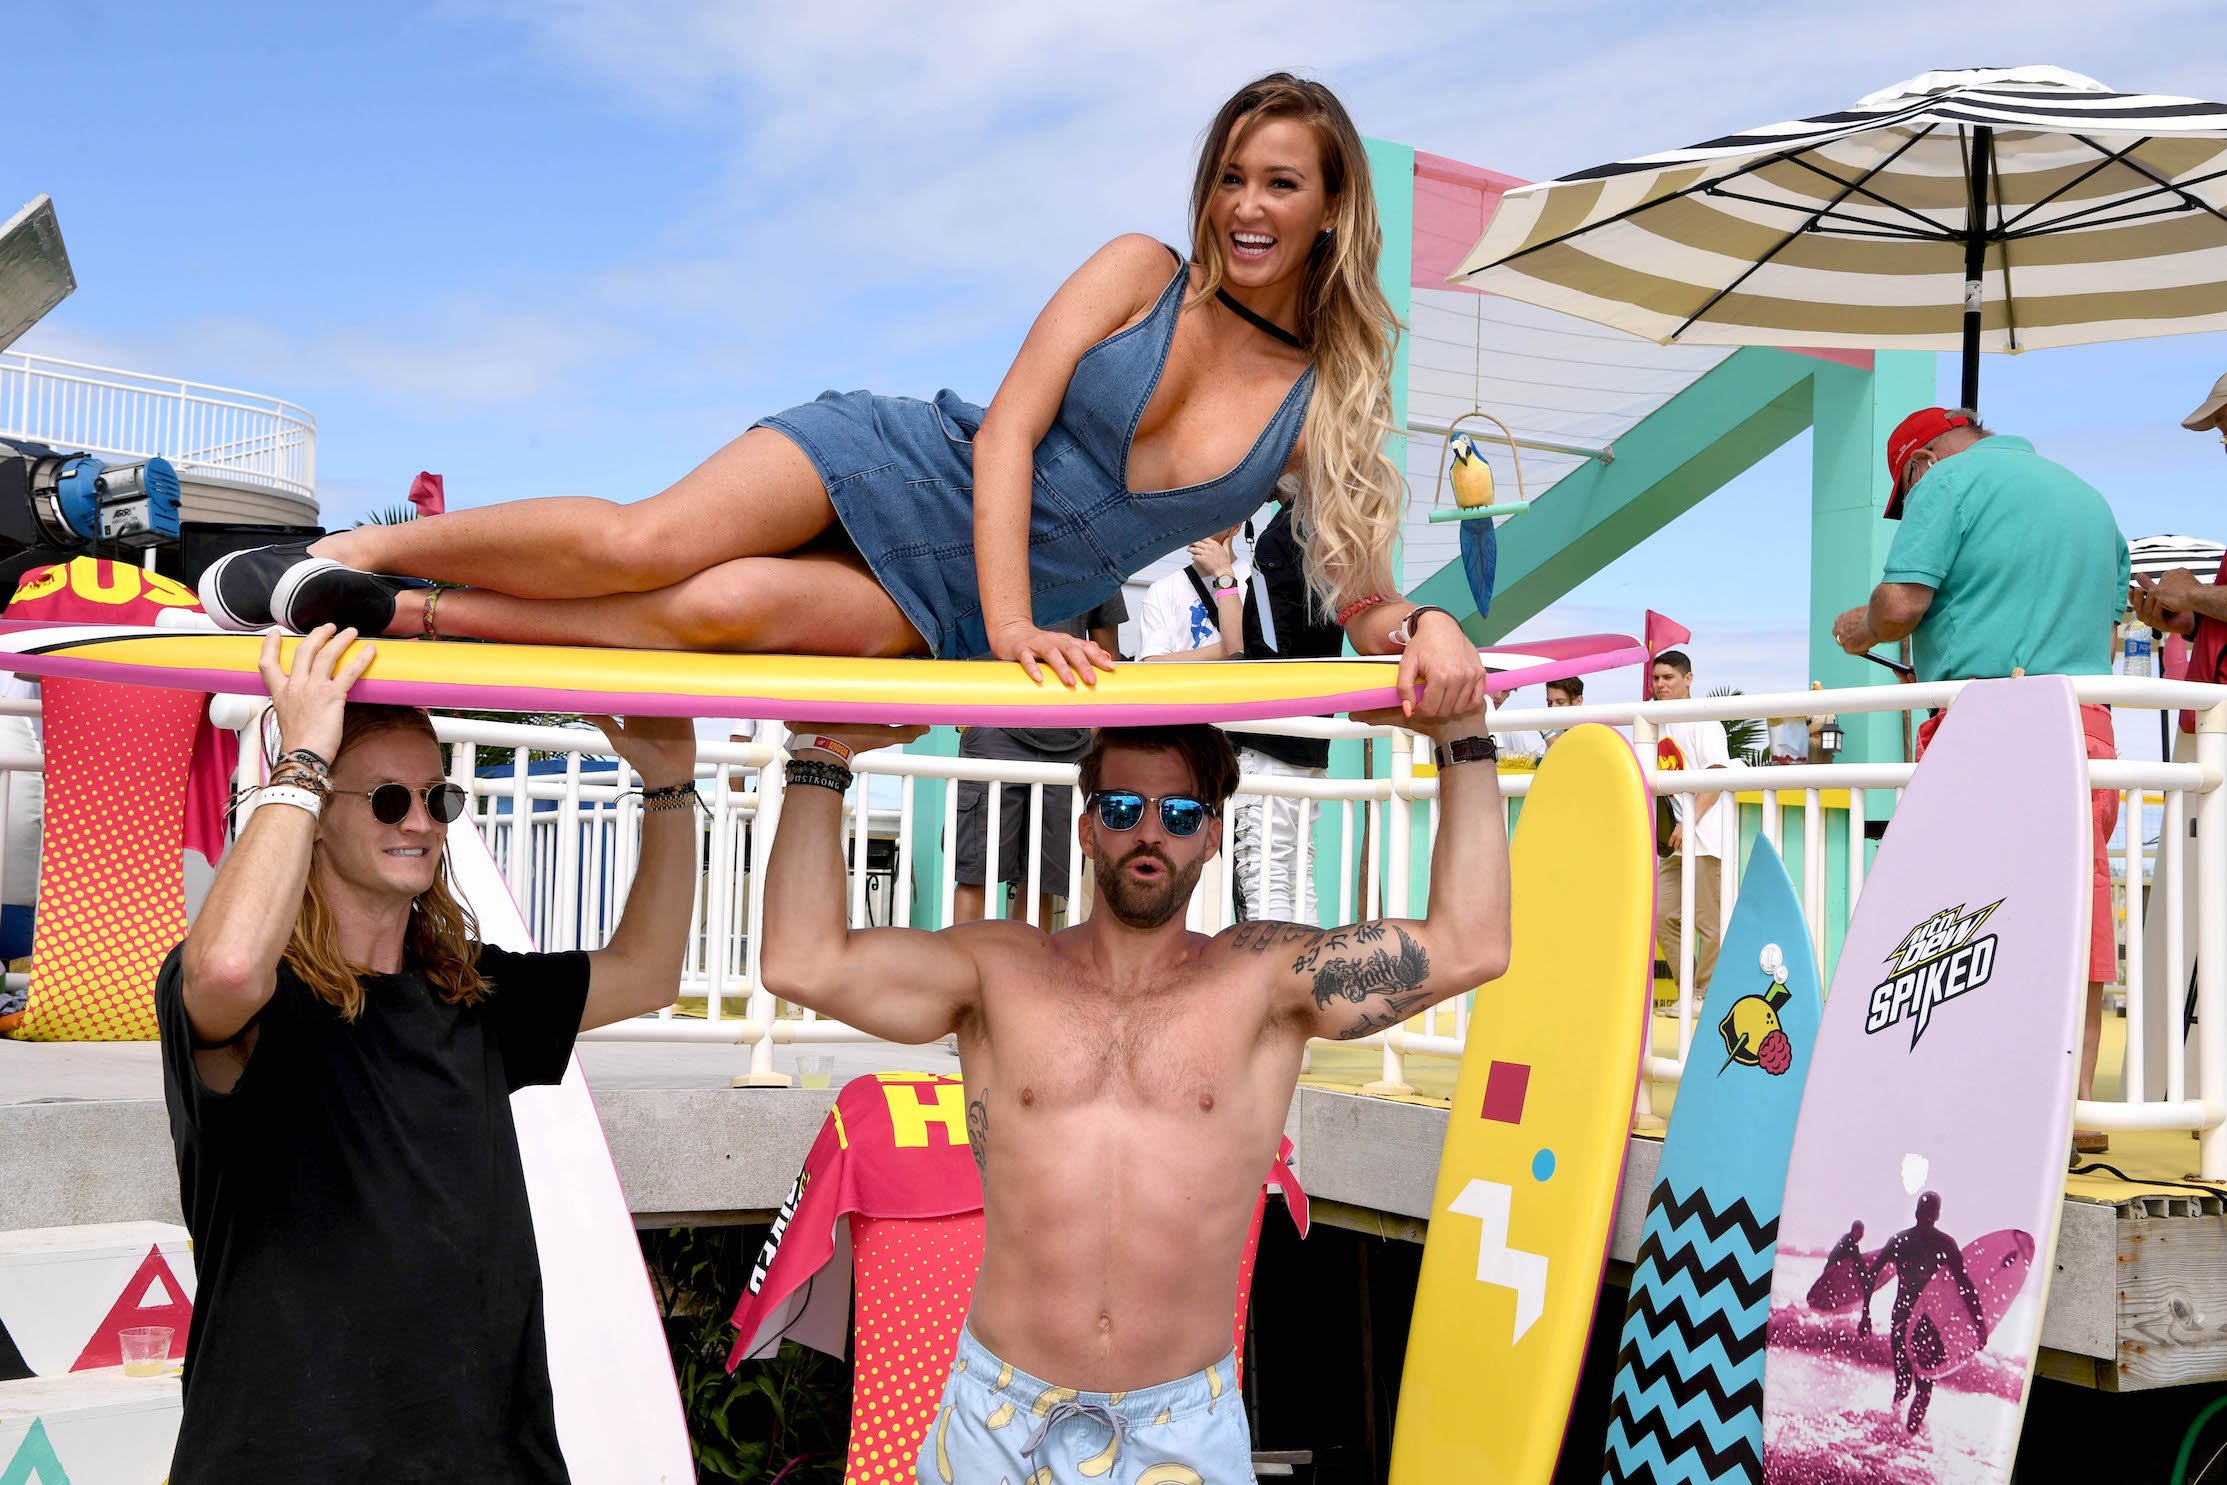 Ashley Mitchell from MTV's 'The Challenge' on top of a surfboard held up by Johnny 'Bananas' Devenanzio and Rory Kramer while they're all at the beach